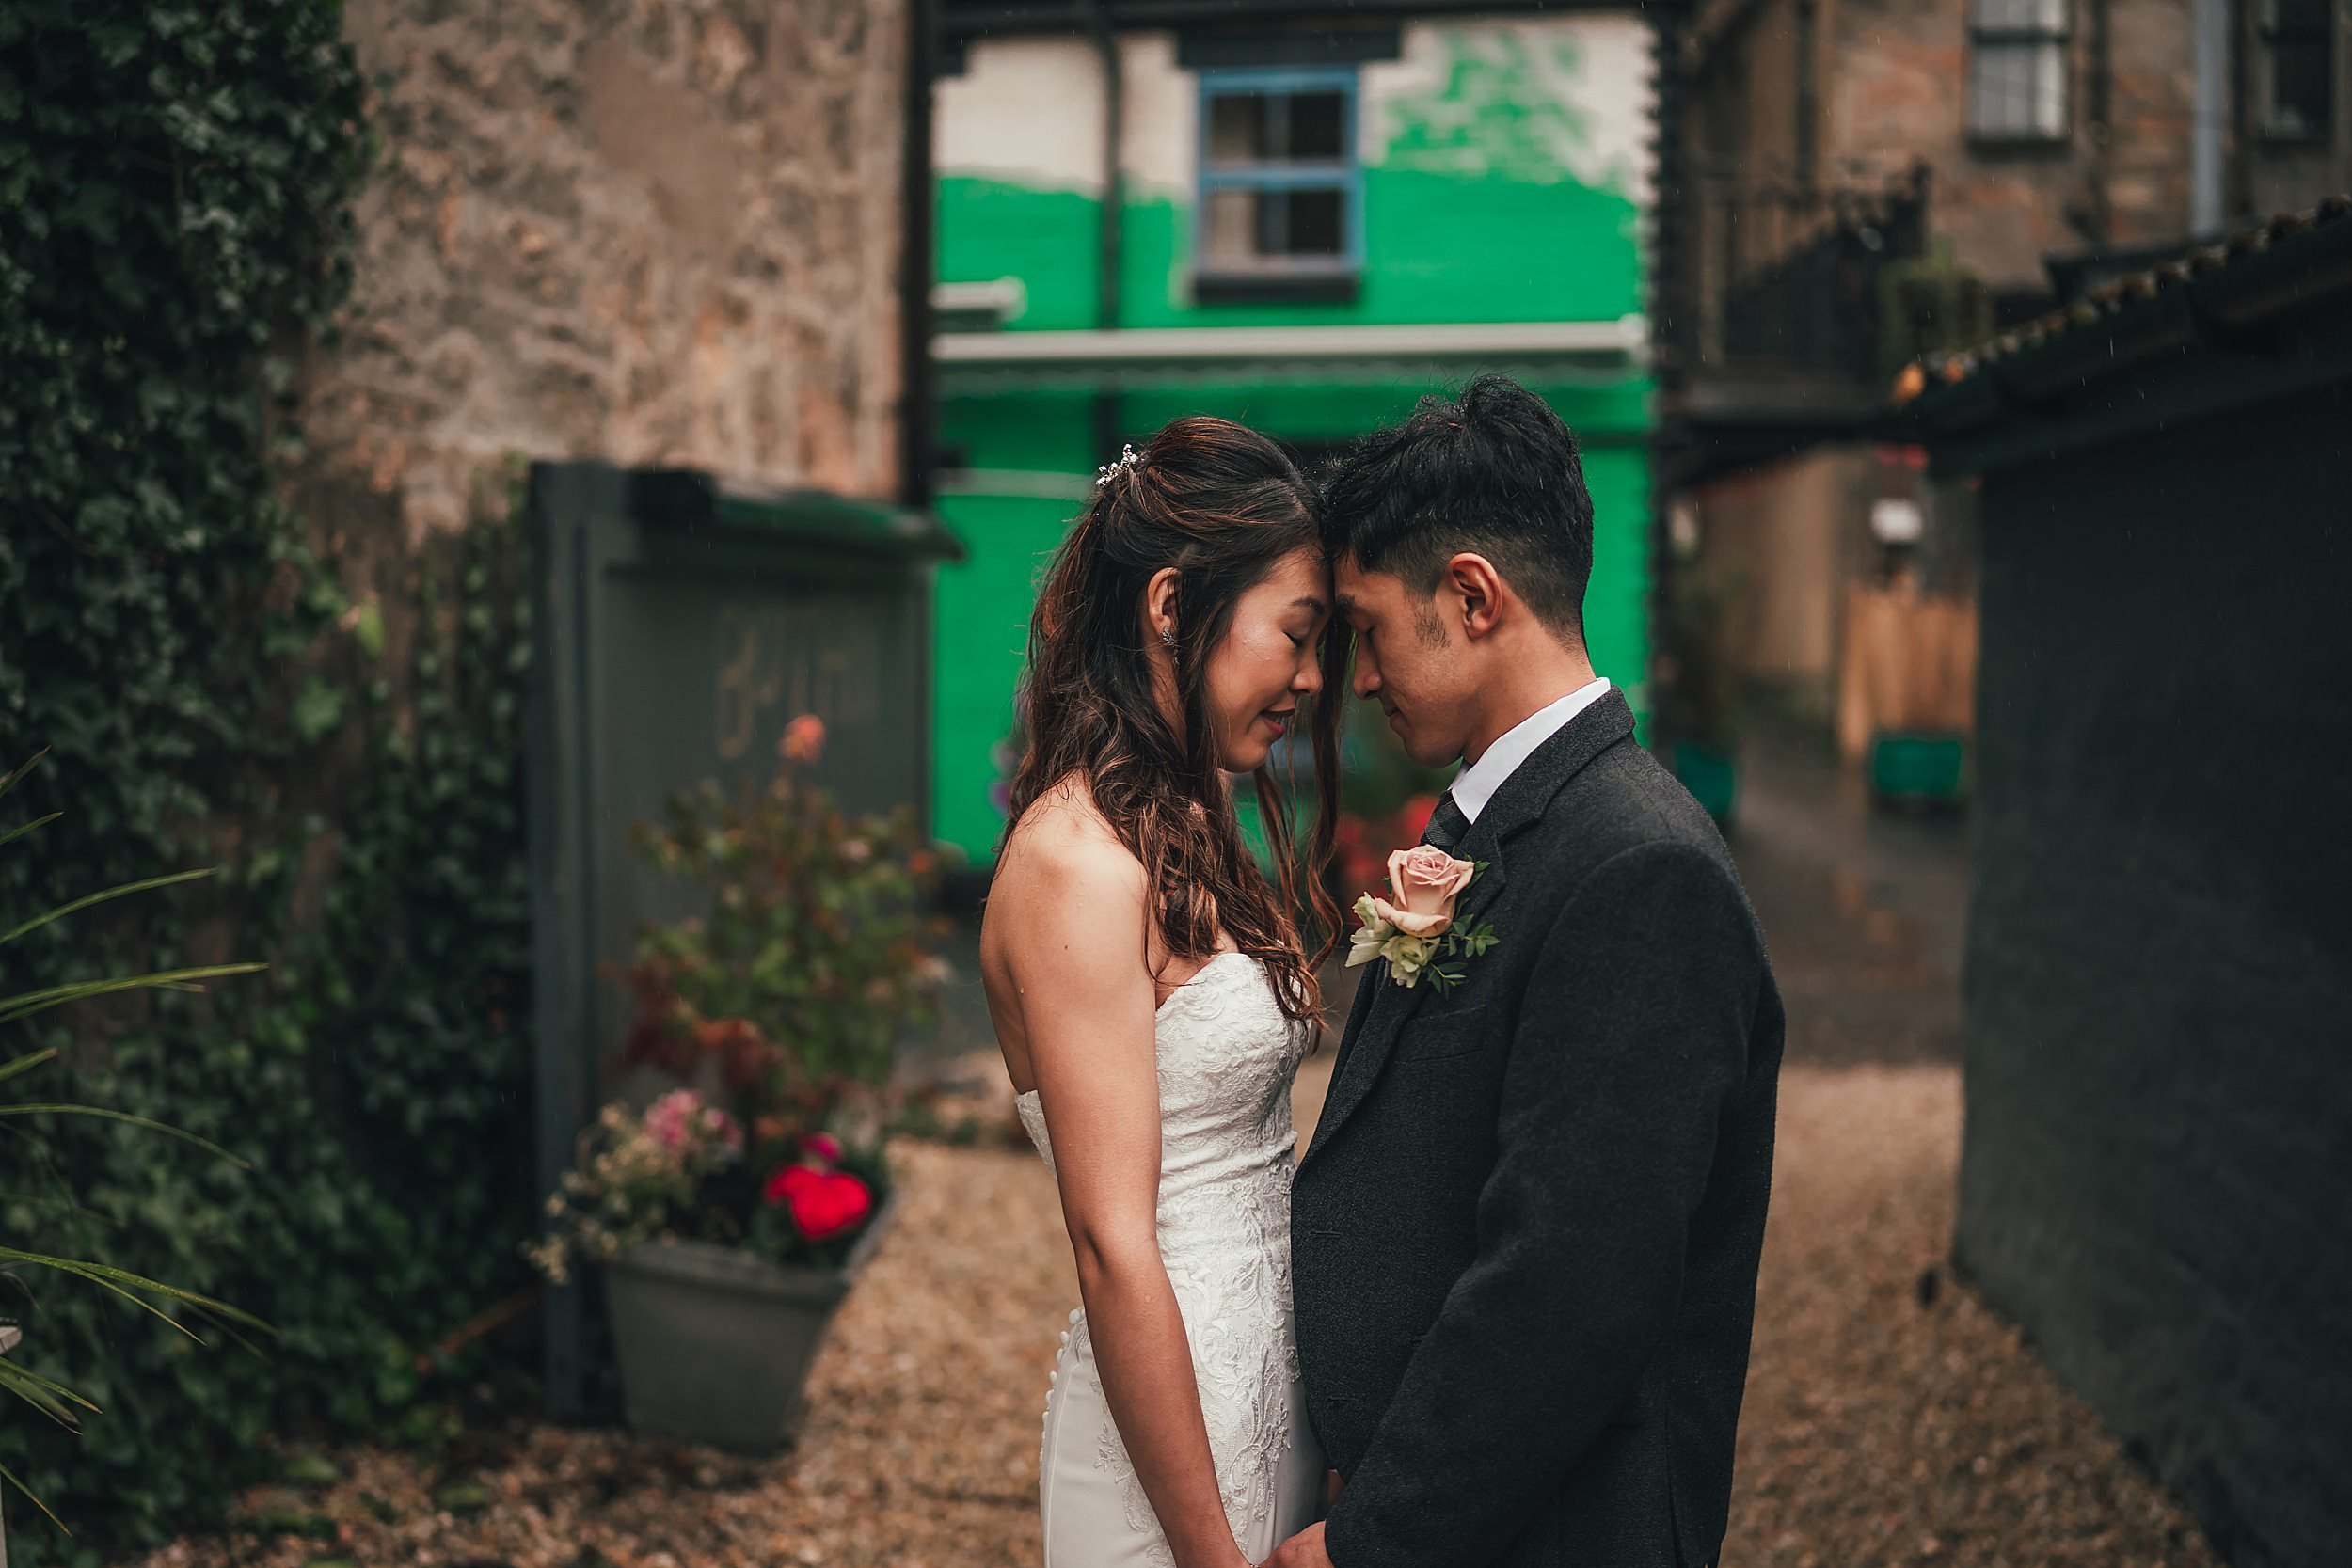 Bride and Groom sharing a moment in Ruthven Lane Glasgow at The Bothy after their wedding